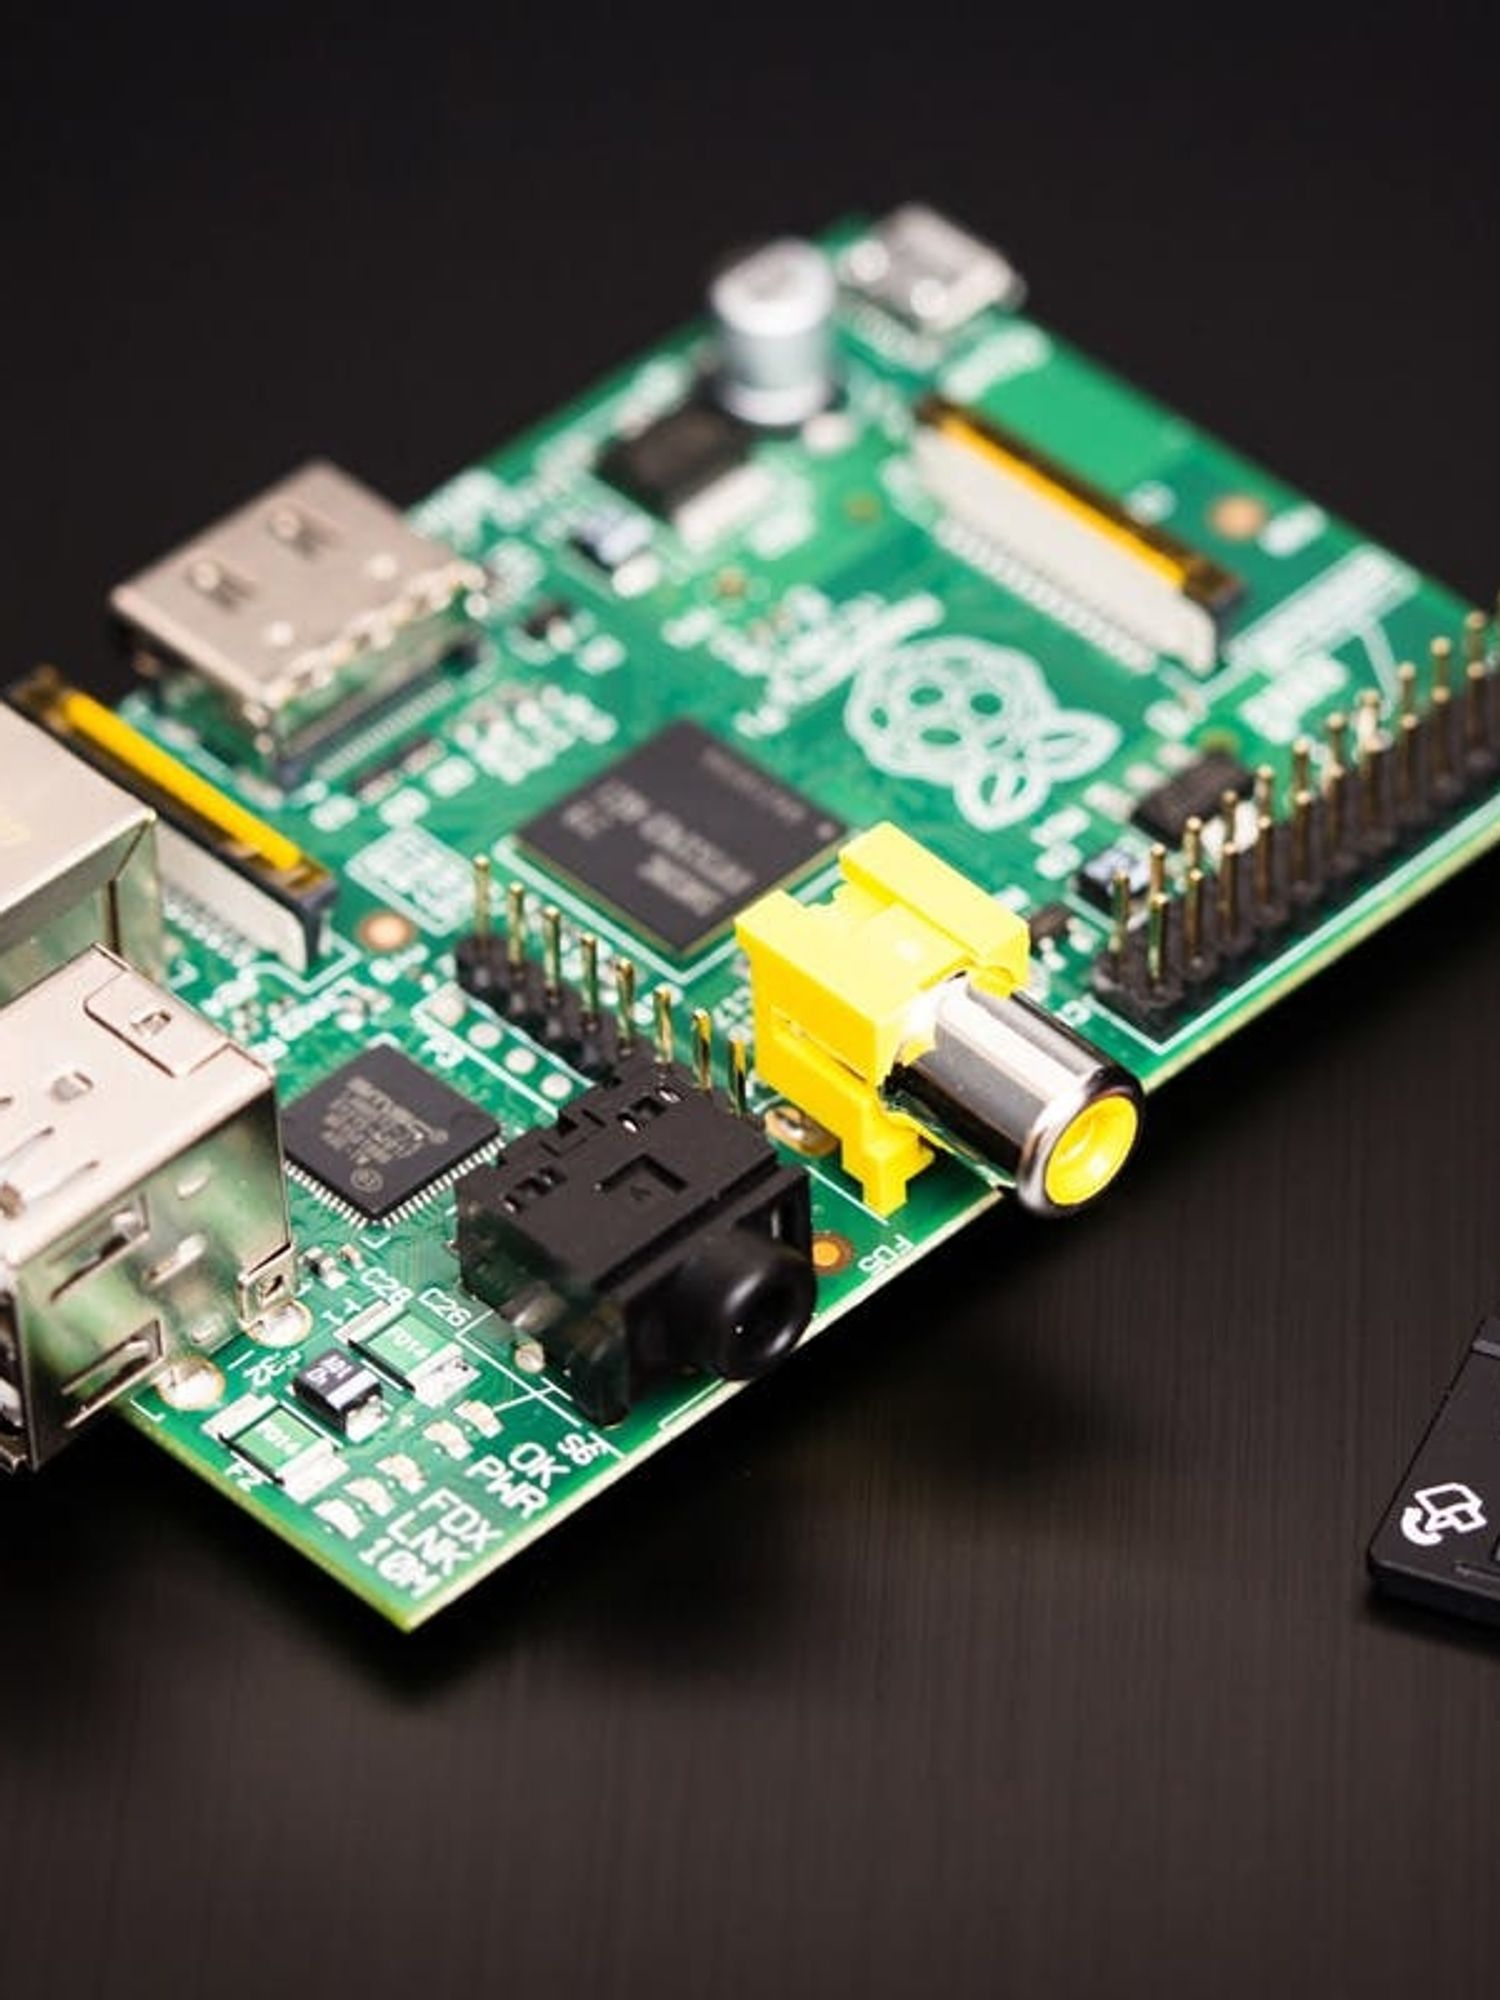 15 Diy Gadgets You Can Make With Raspberry Pi Brit Co 6319